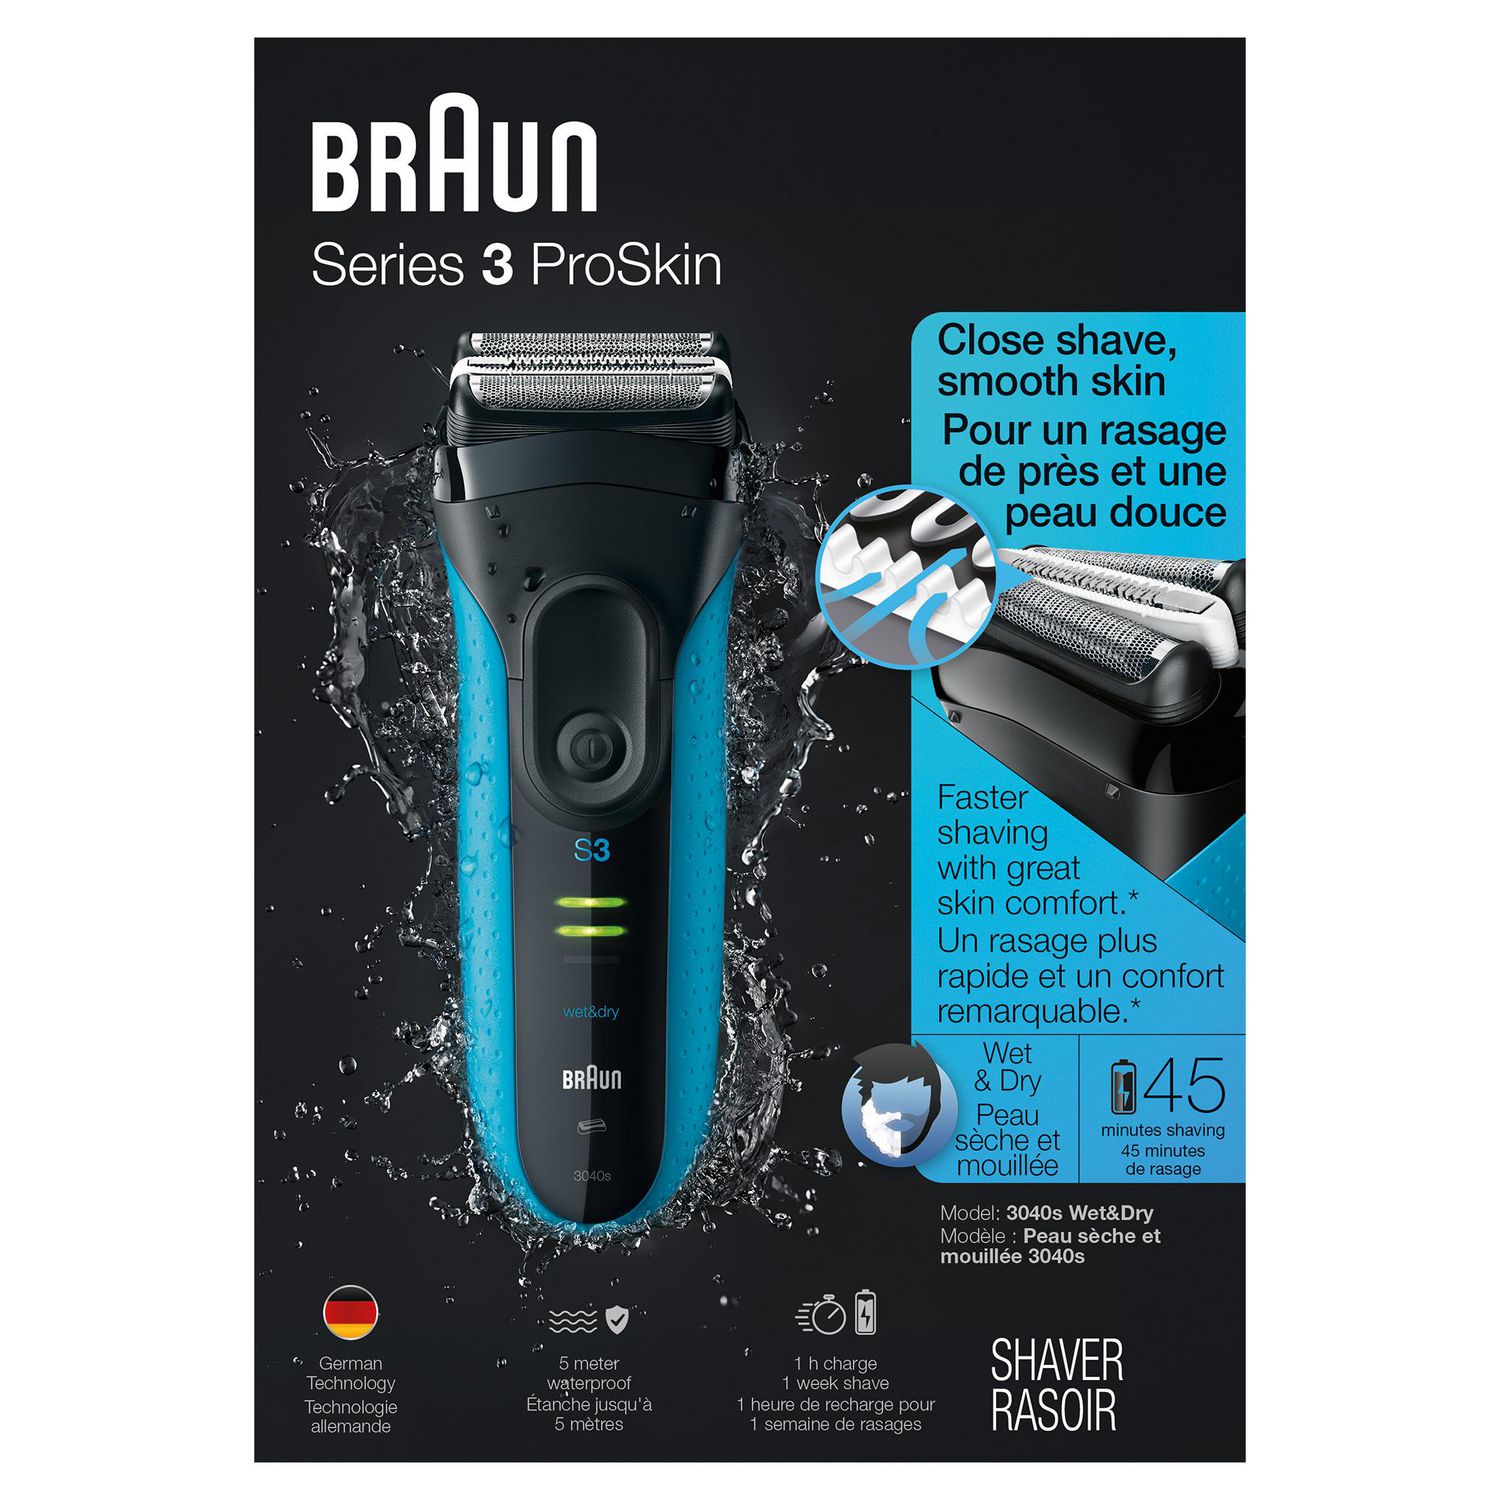 Braun Series 3 Proskin for 3-in-1 Razor Shaver, Electric 1 Men, Black/Blue, Shave&Style and Dry Wet Set